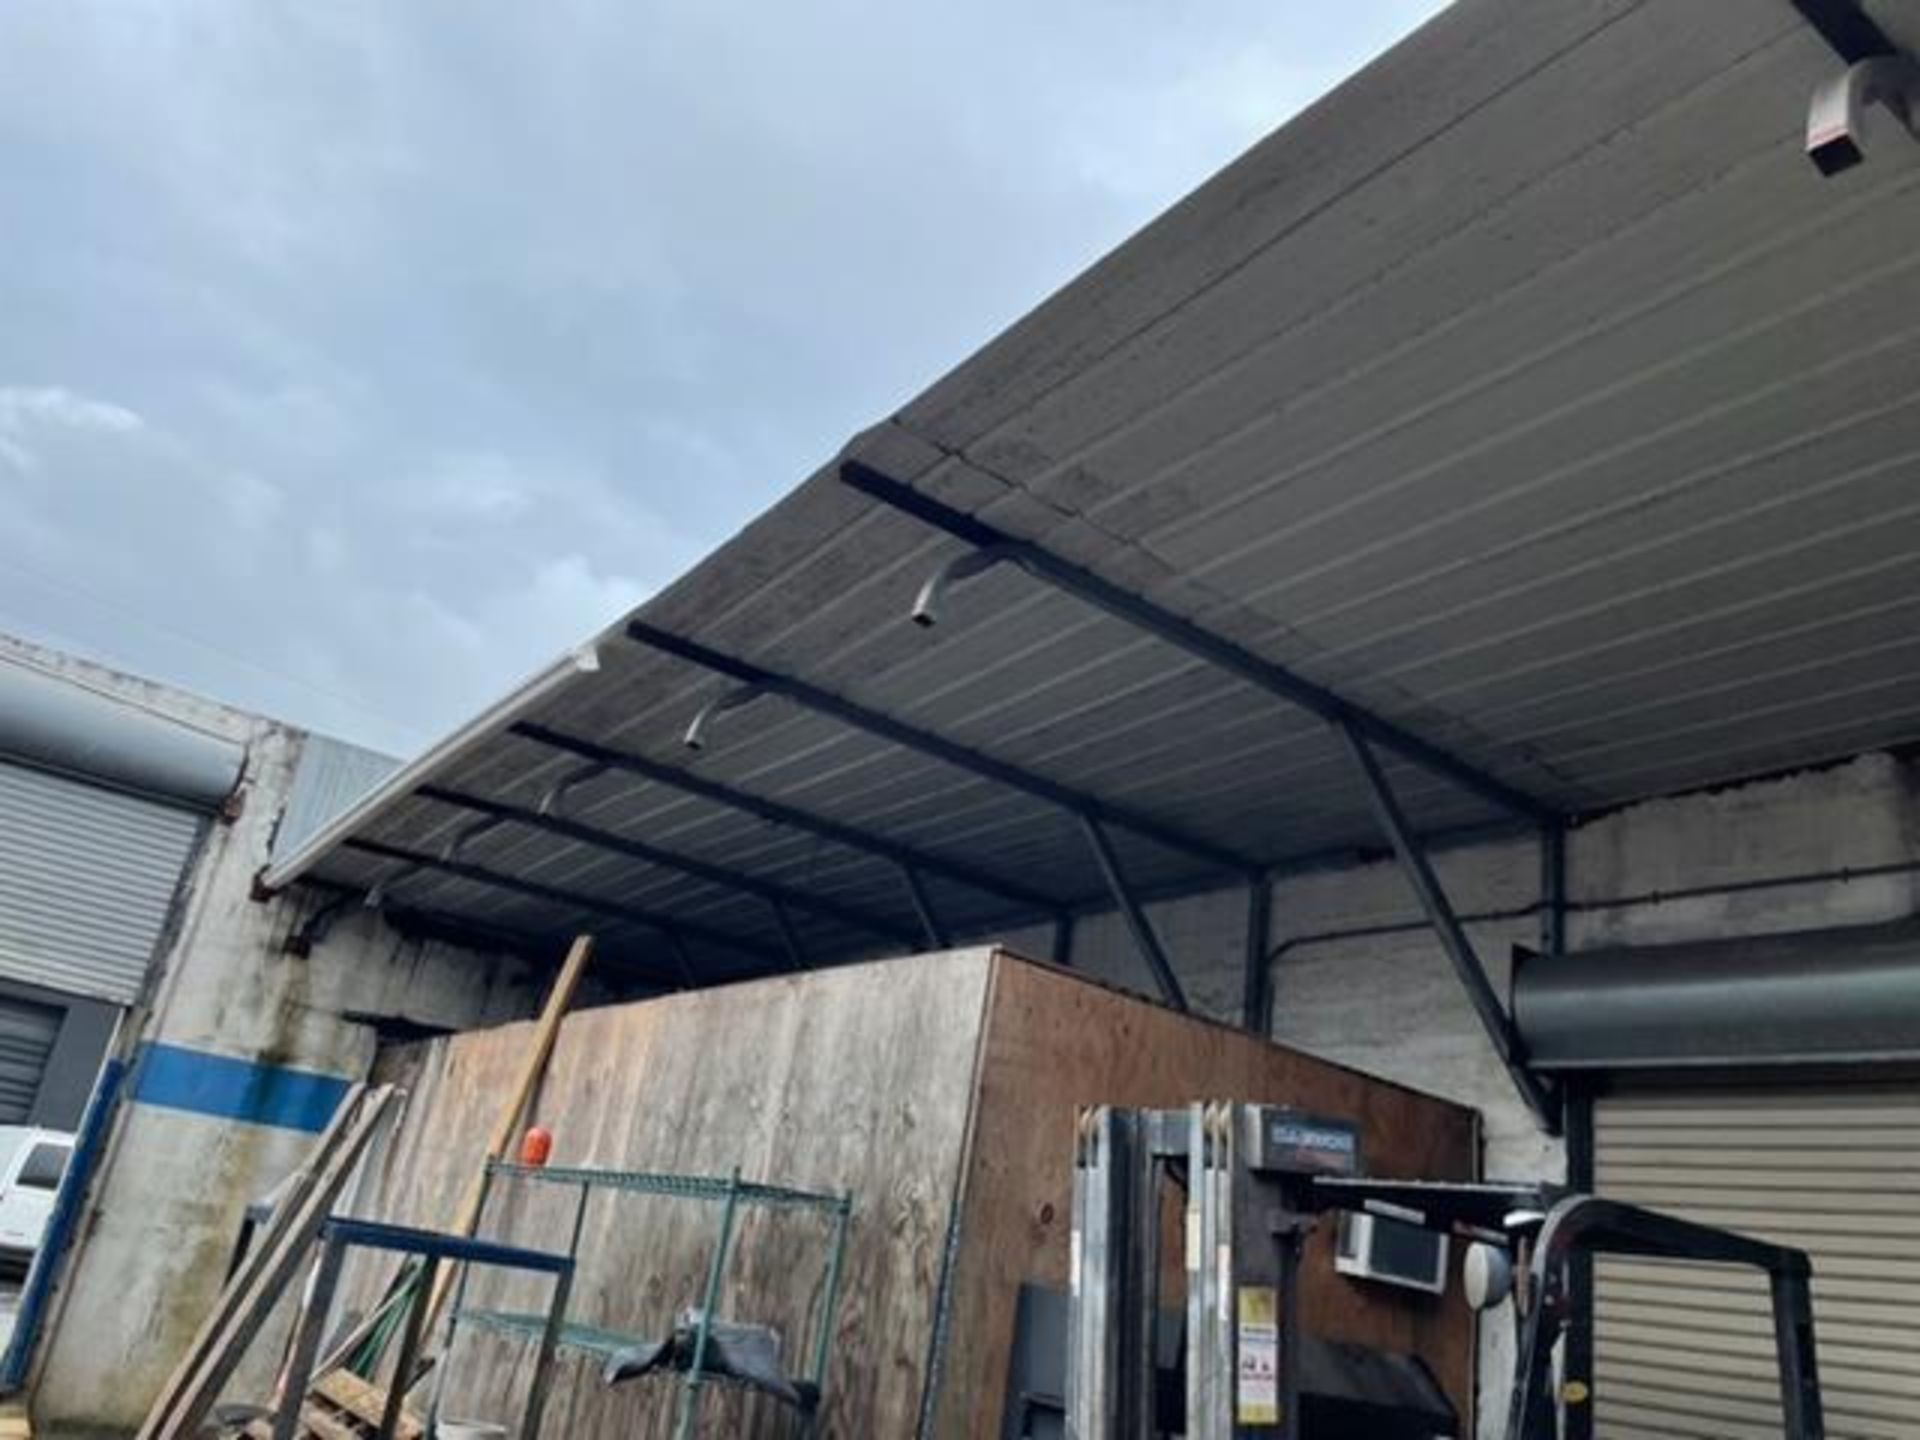 OVERHEAD ROOF PANELS WITH 10 CANTILEVER MOUNTING ARMS - 52' LONG x 13' (LOCATED IN HIALEAH, FL) - Image 2 of 2